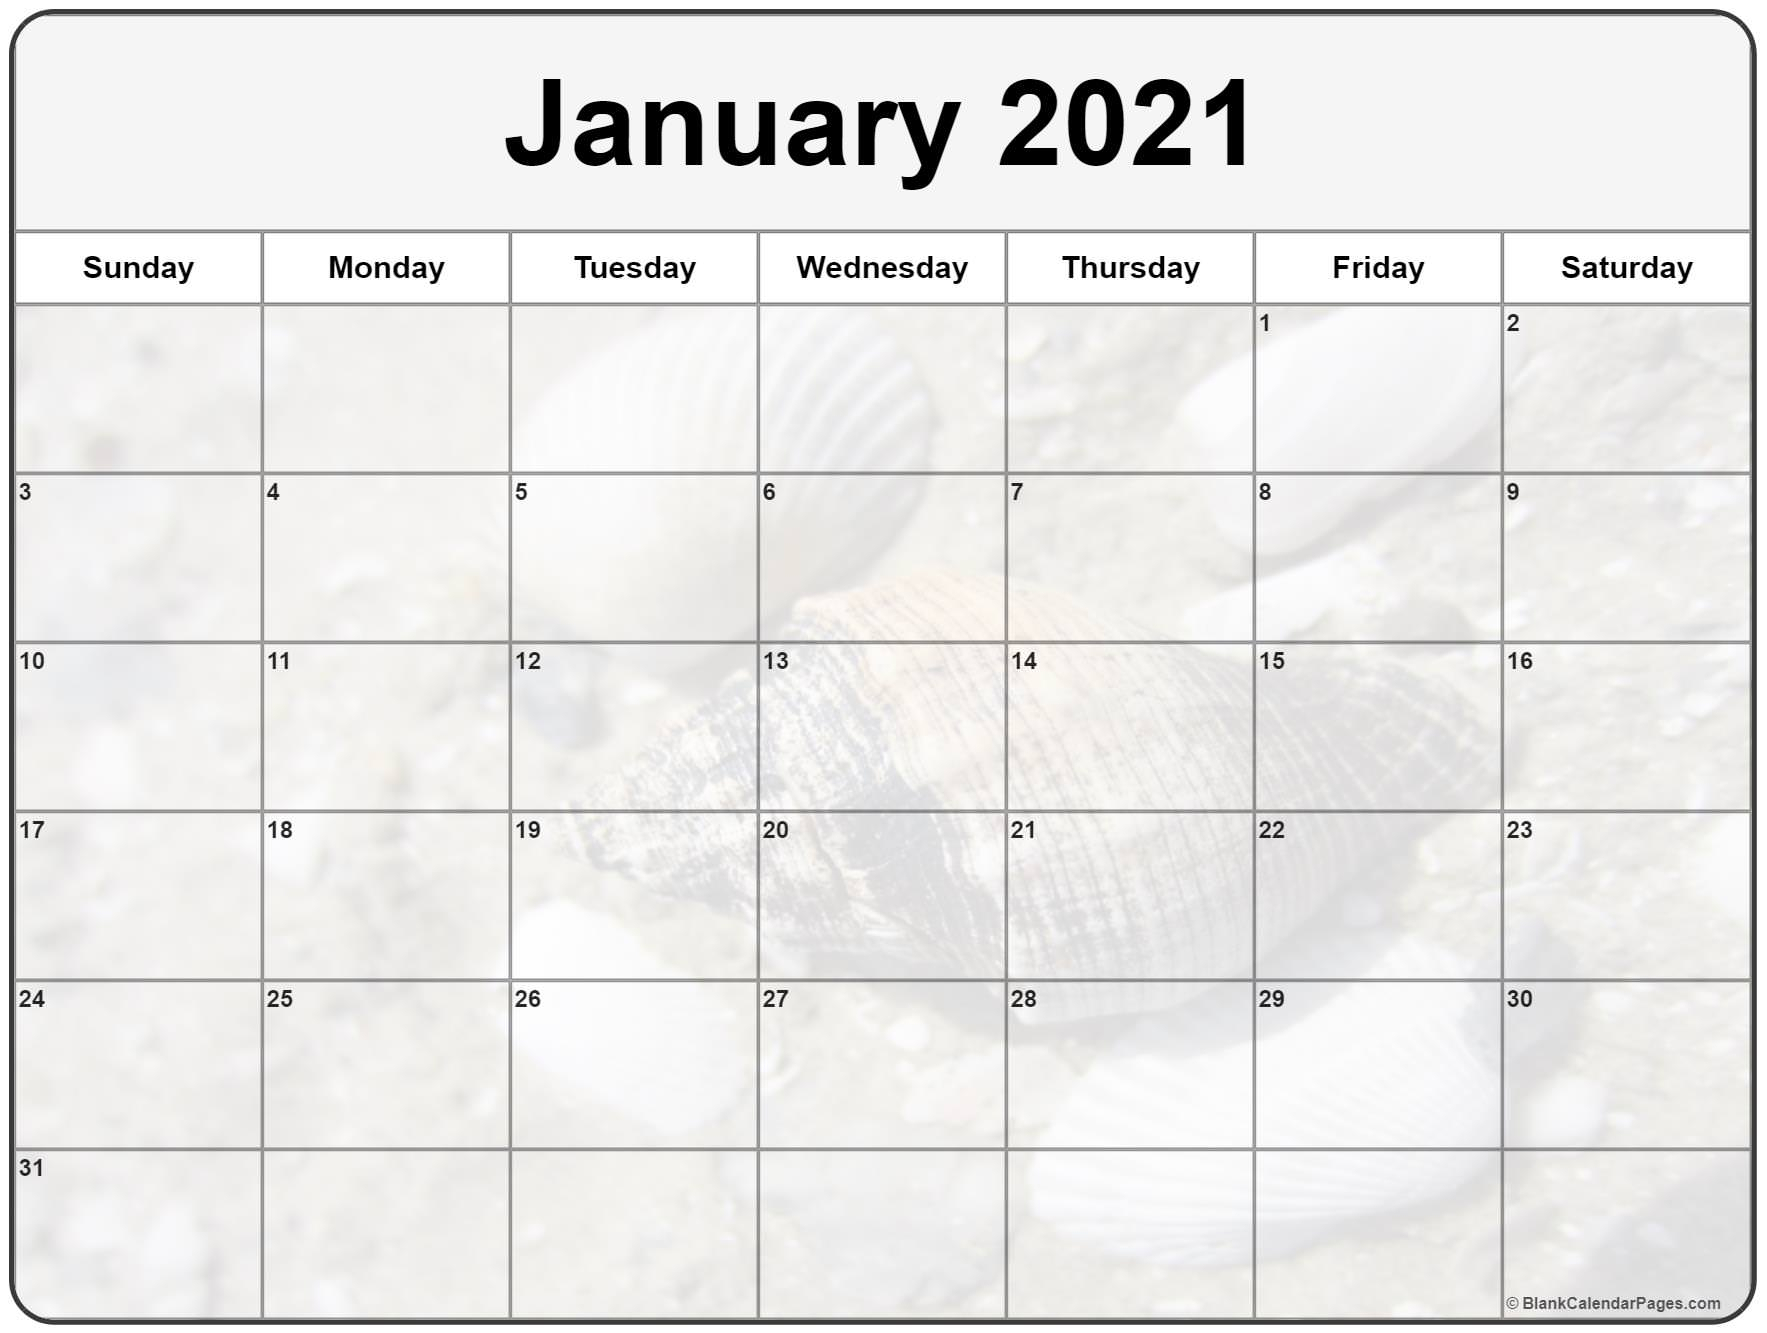 Collection Of January 2021 Photo Calendars With Image Filters.